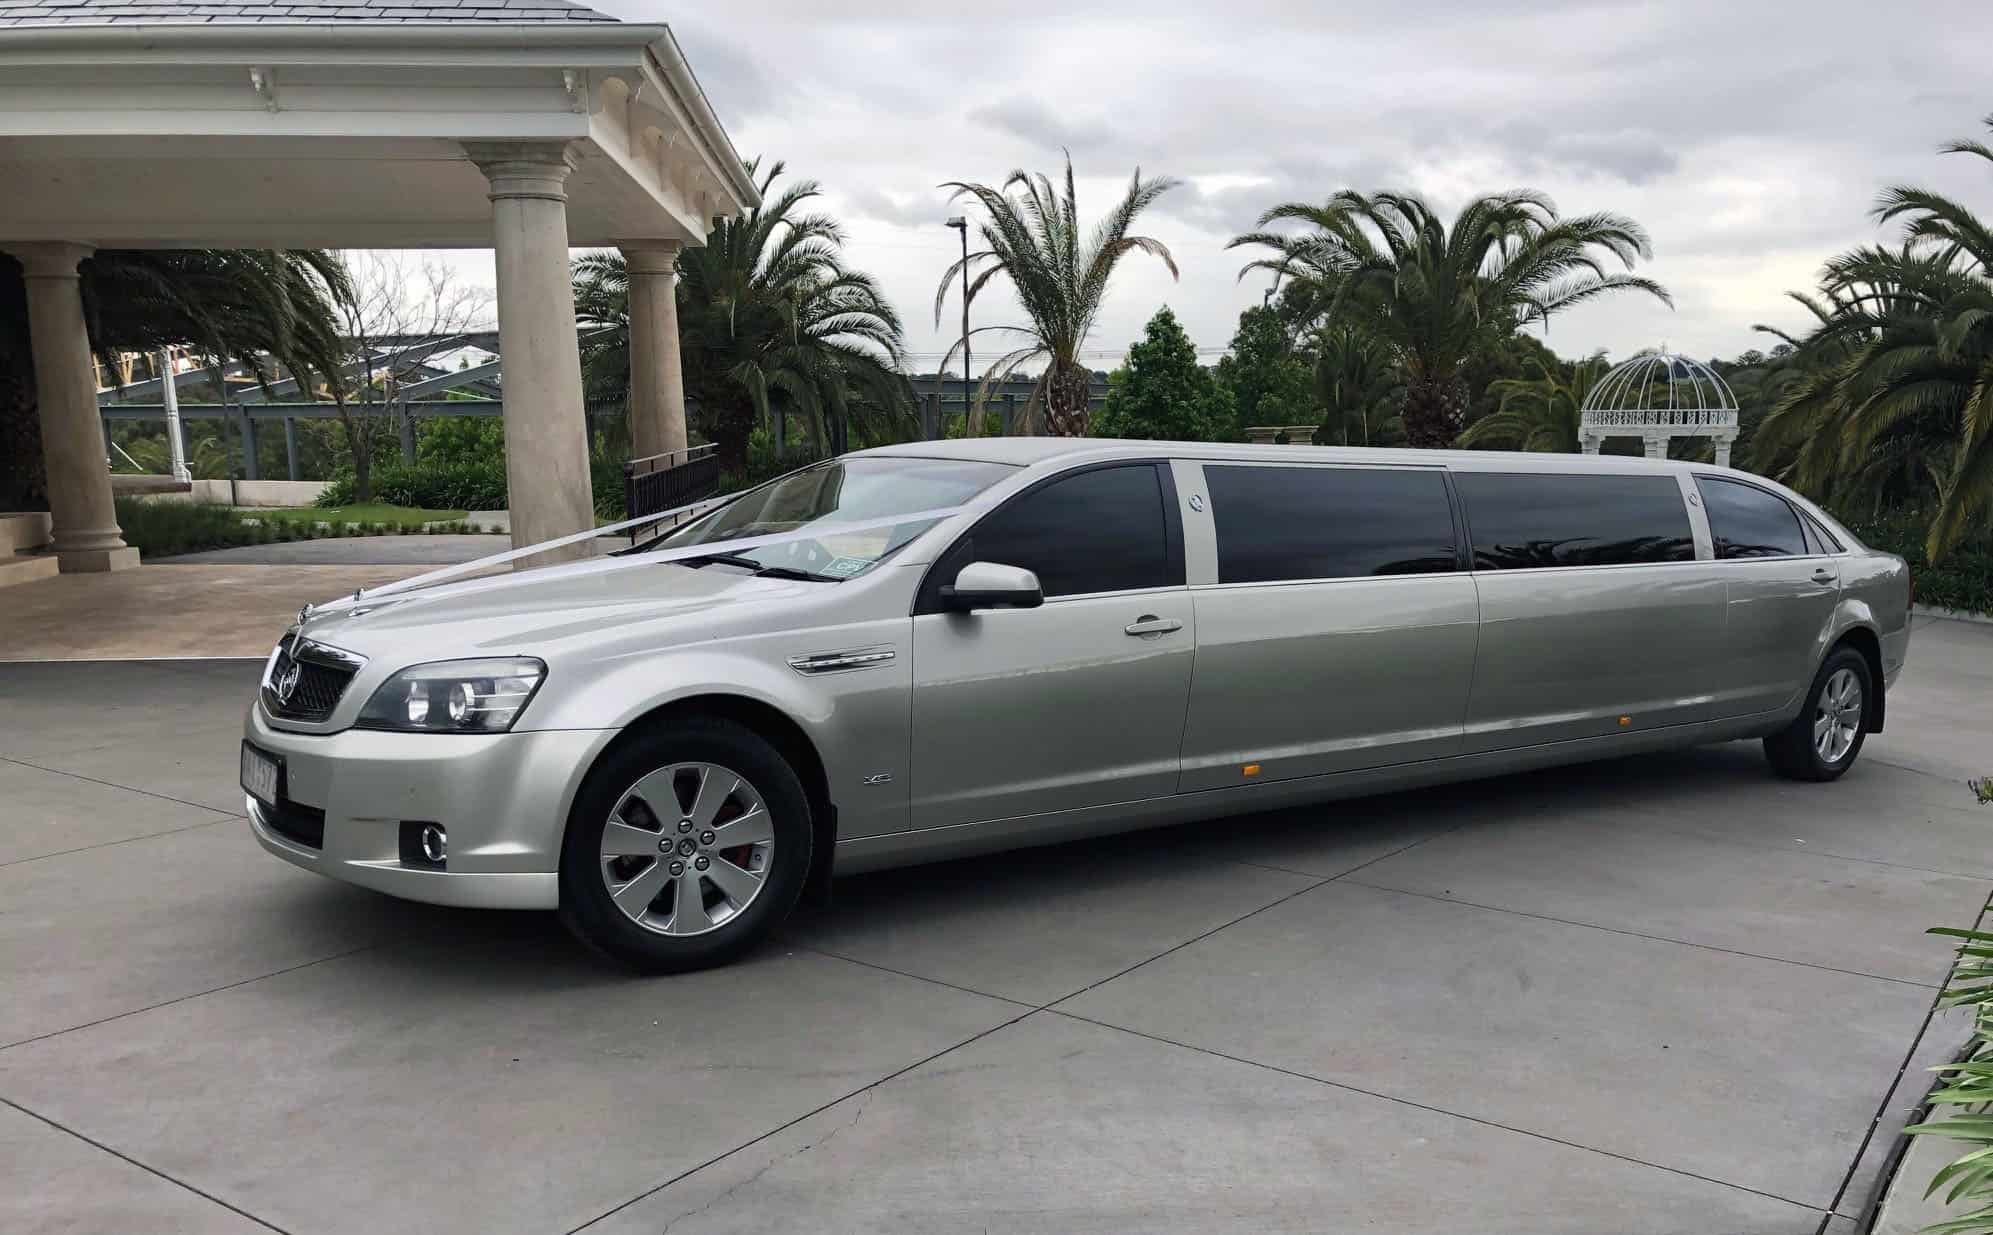 Limousine King | June 2021 Stretch Limo bookings still Available